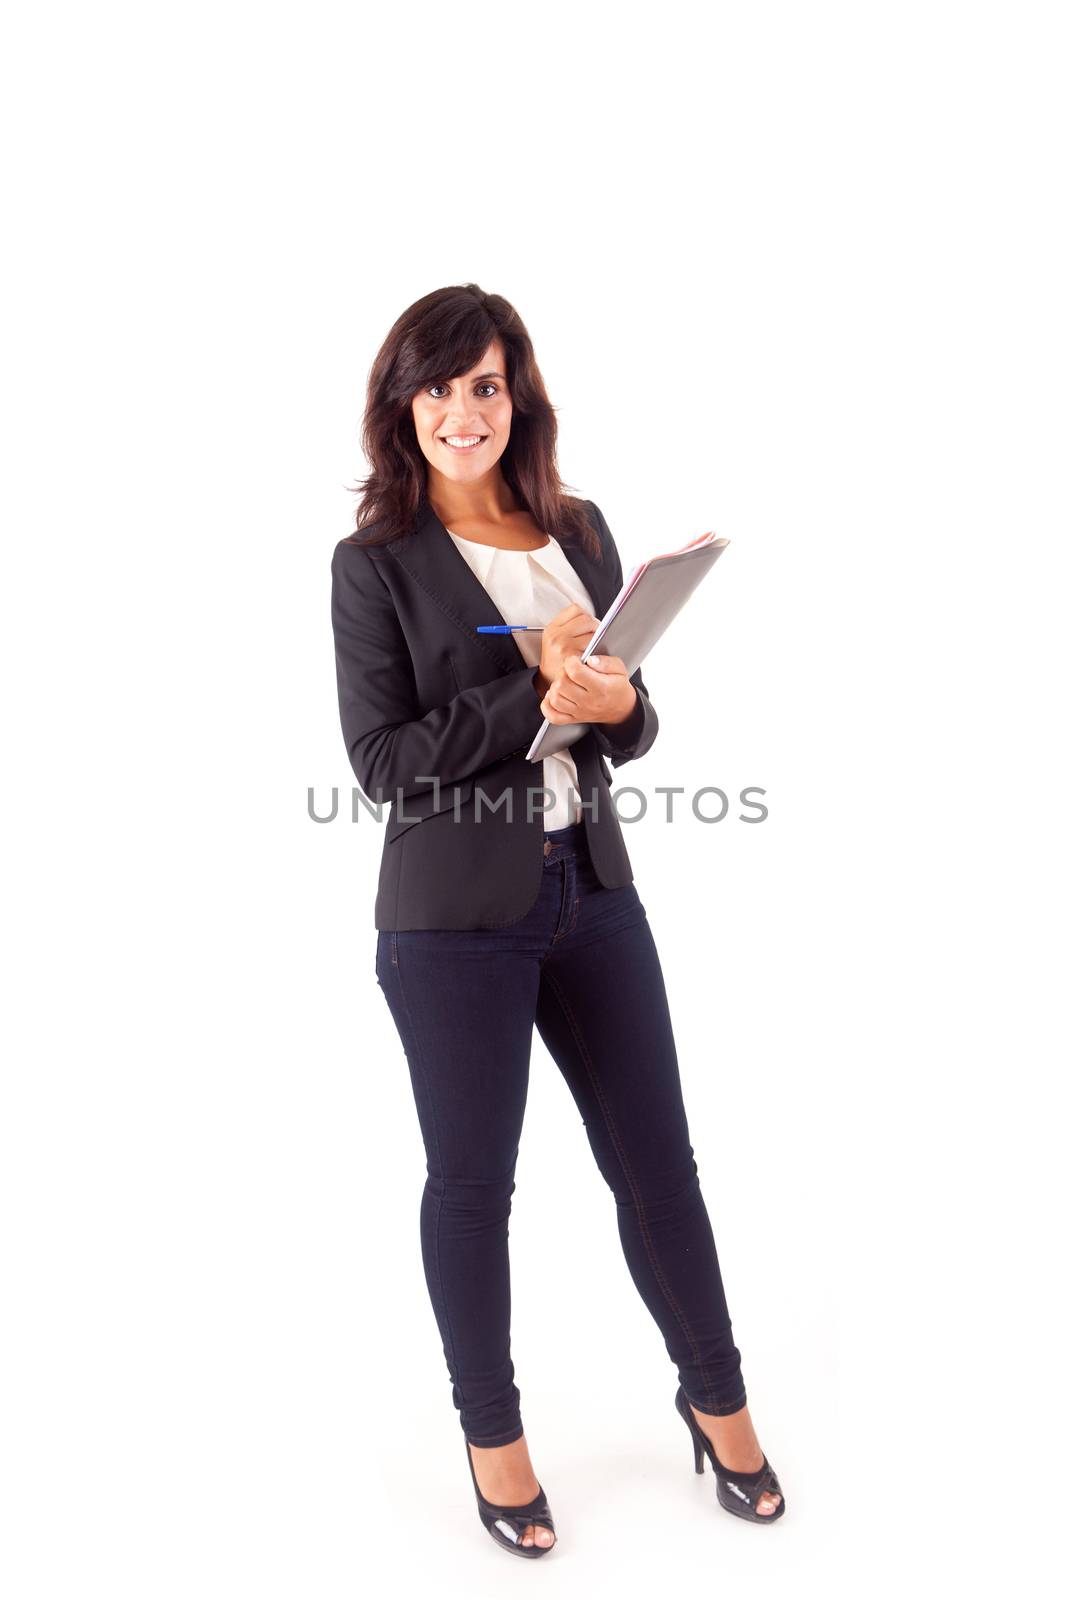 Beautiful woman scheduling an appointment over white background